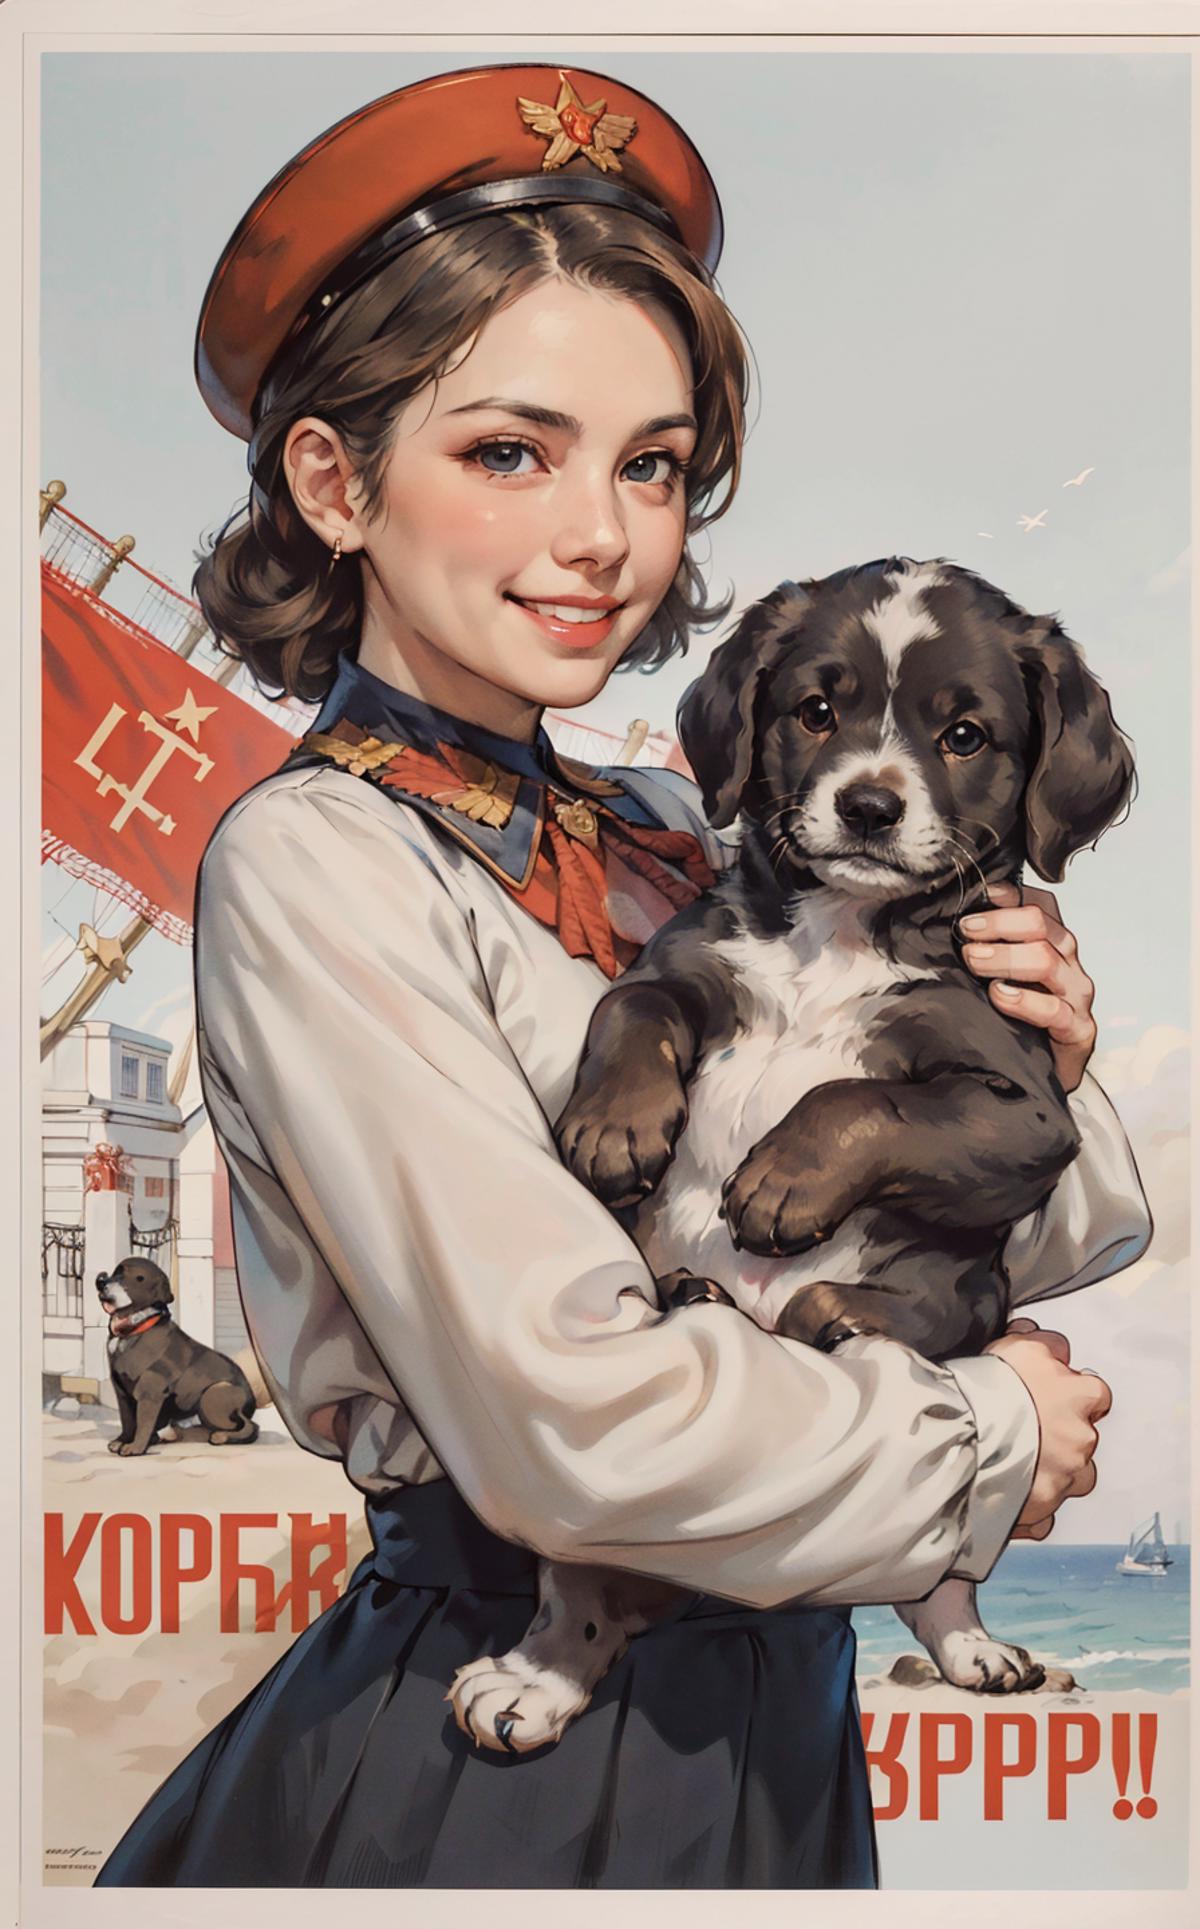 USSR POSTER image by pizzagirl